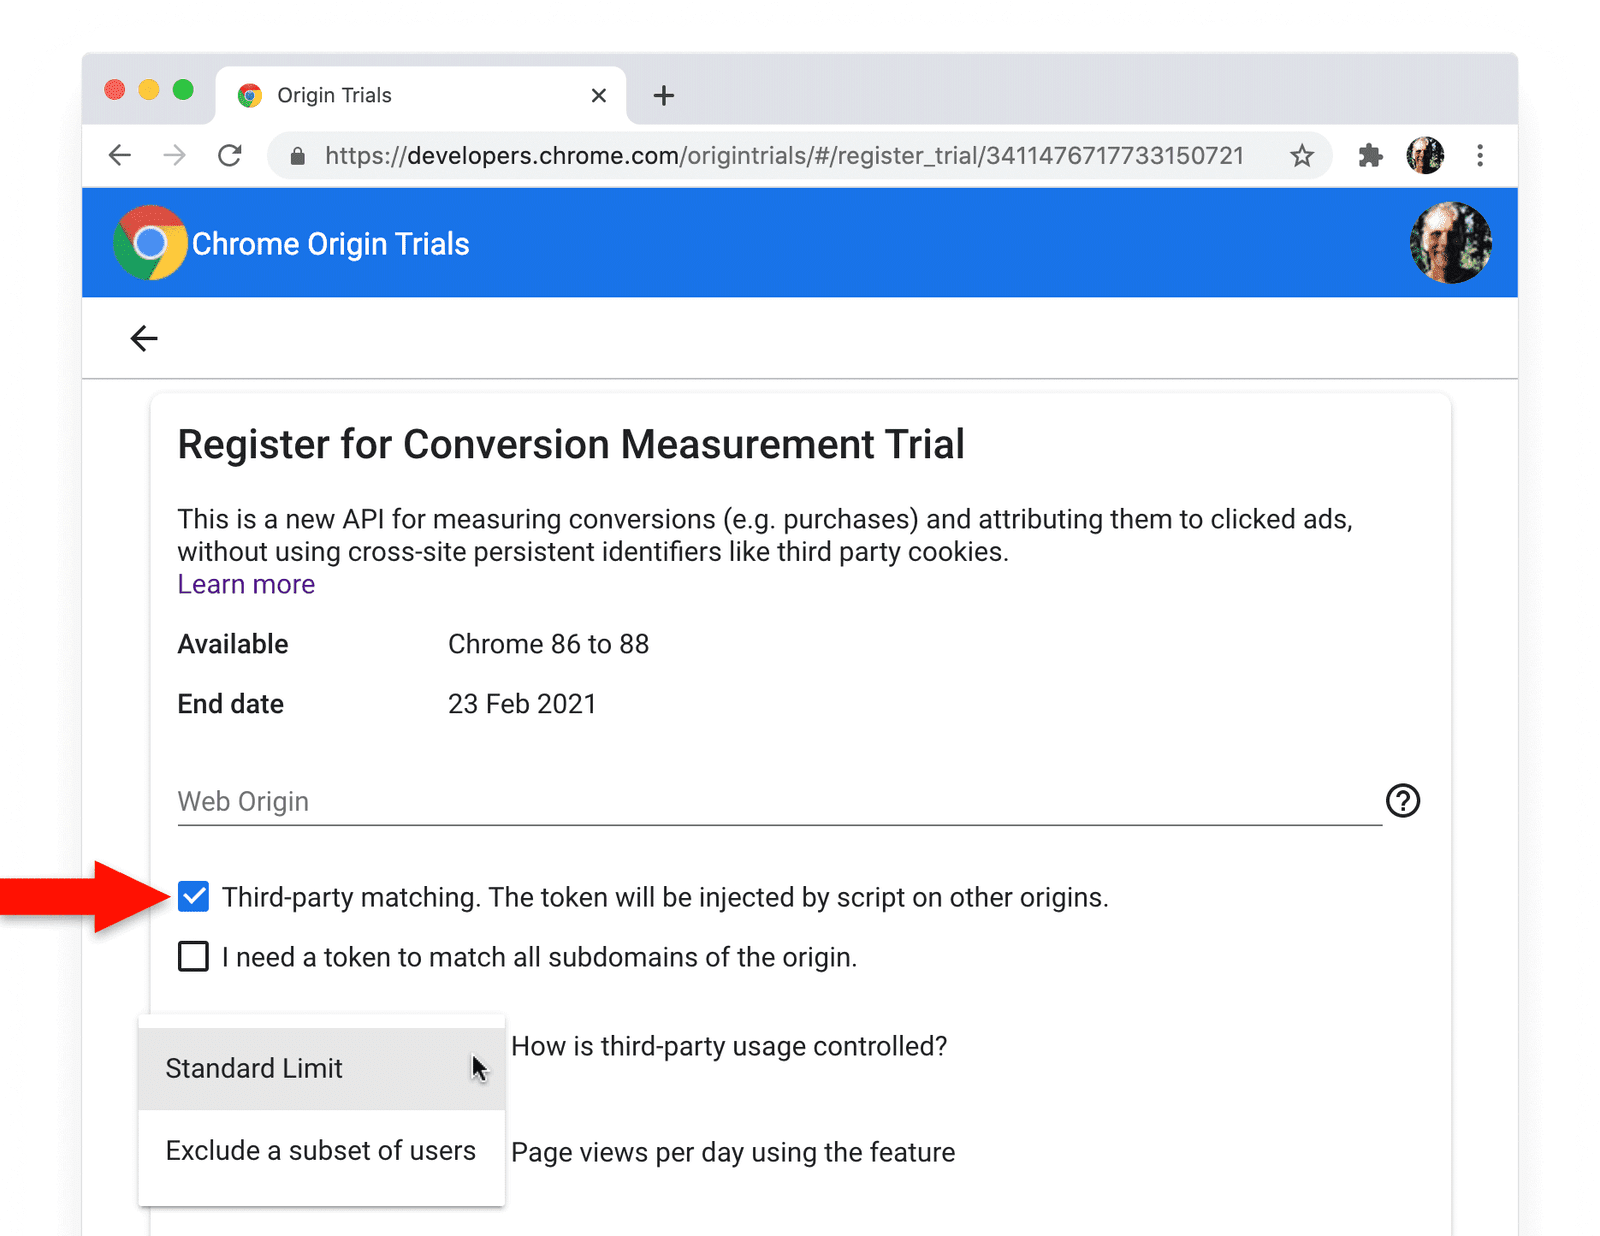 Chrome origin trials registration page for the Conversion Measurement API, with third-party matching checkbox selected.